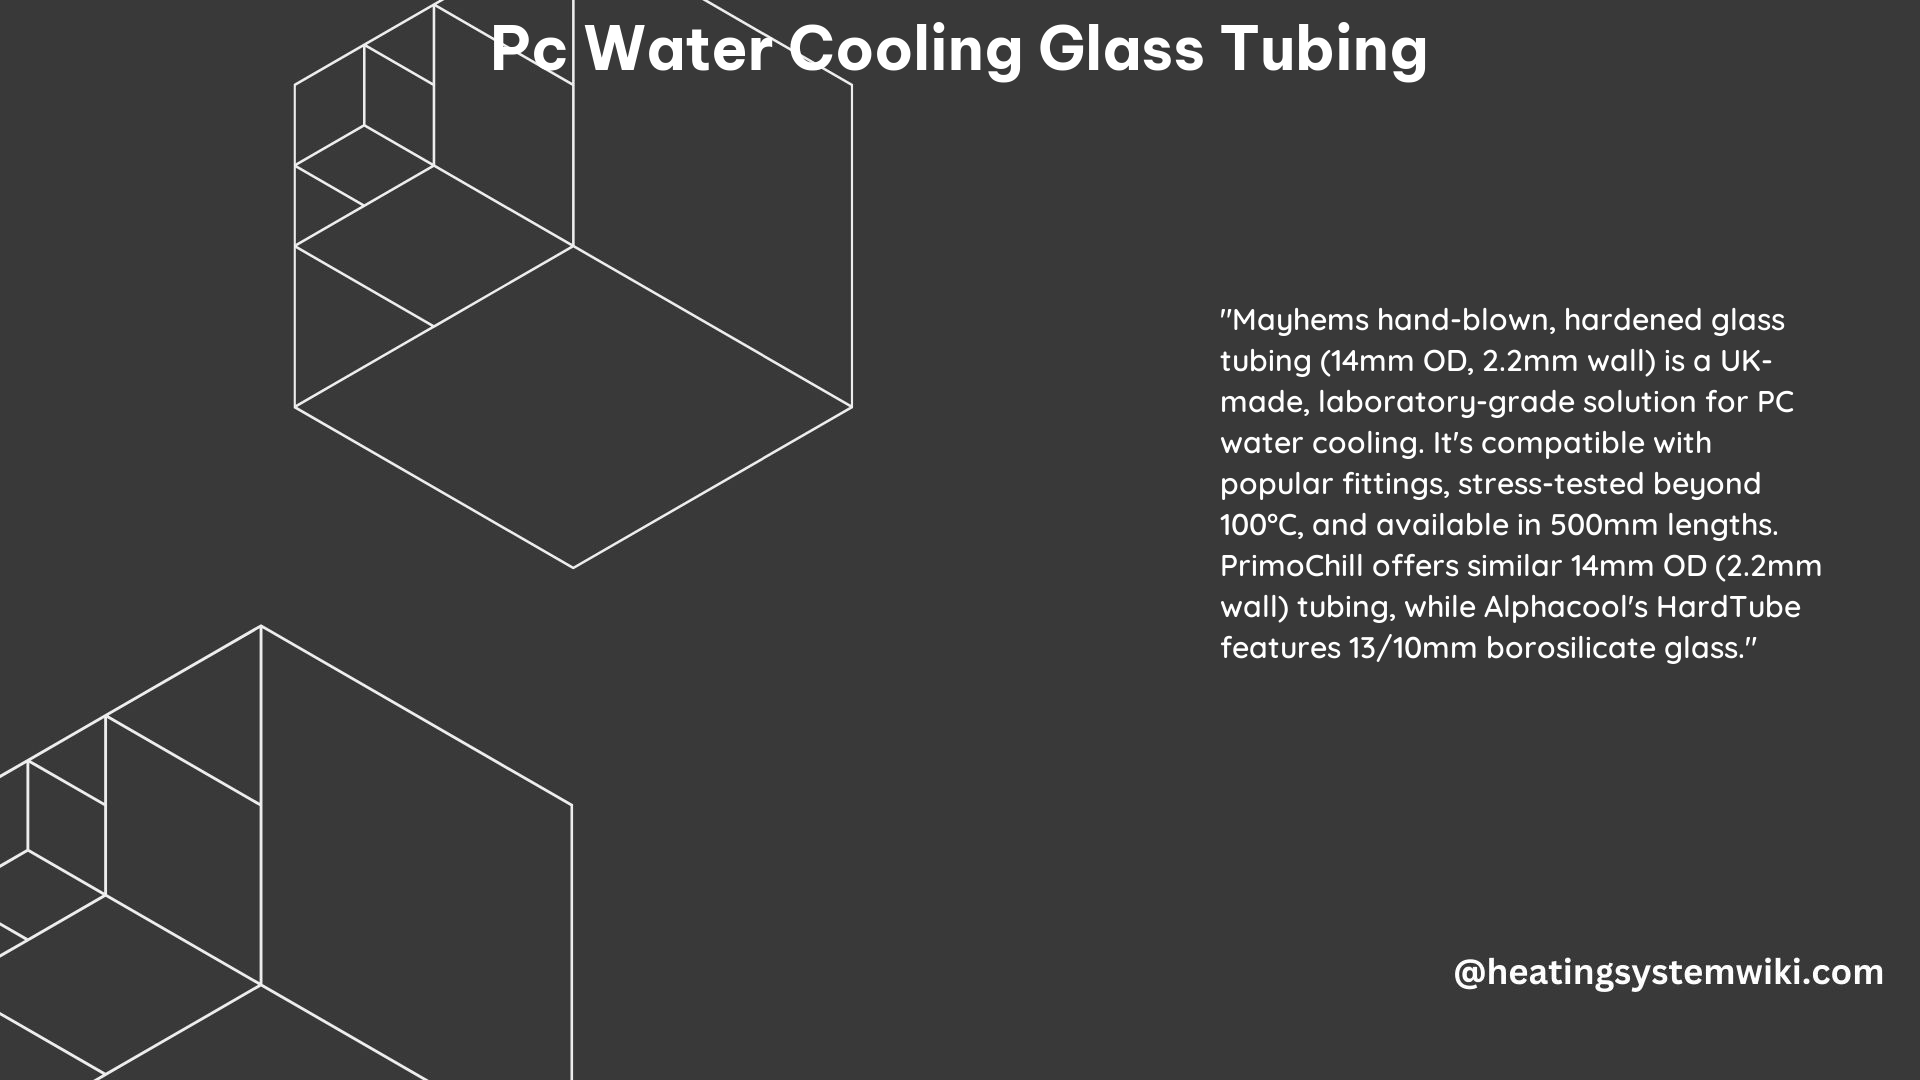 PC Water Cooling Glass Tubing